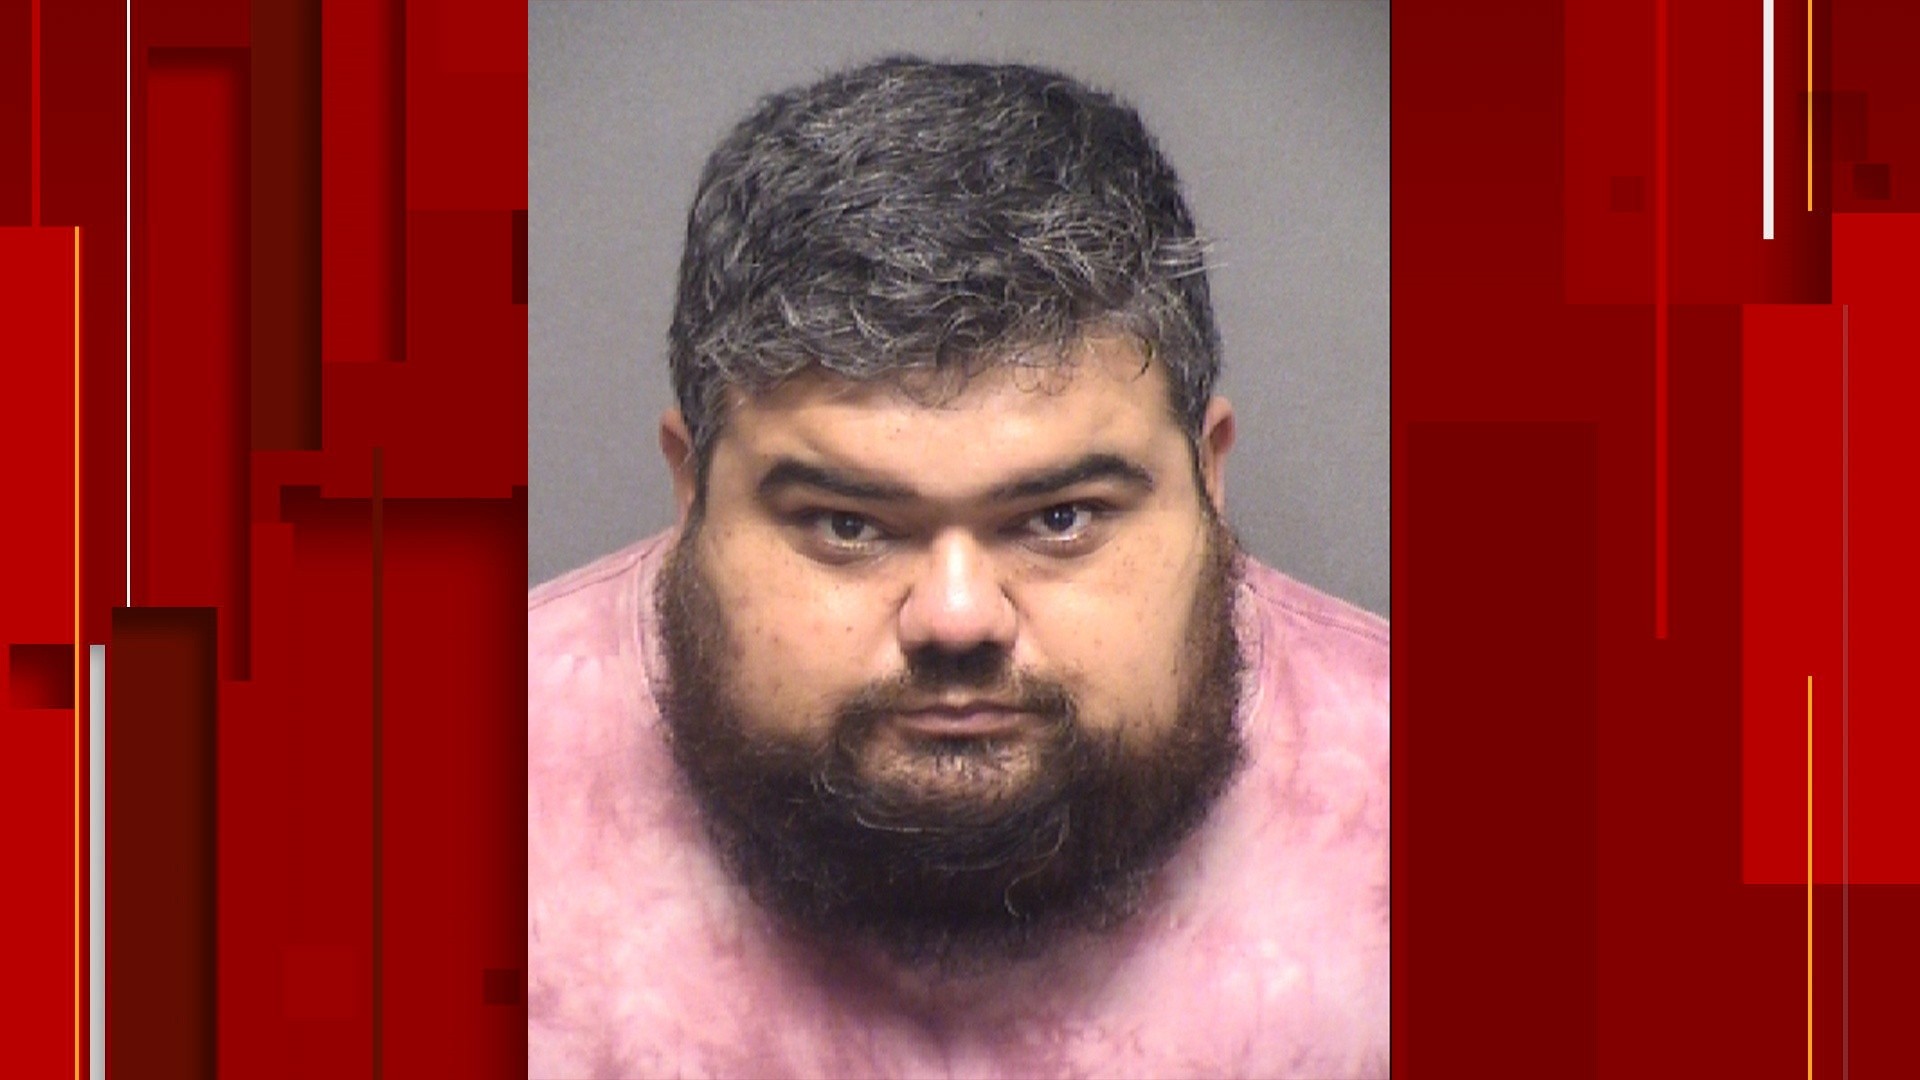 Sxxxxx Vibo - San Antonio man arrested after uploading several videos of child porn  online, records show